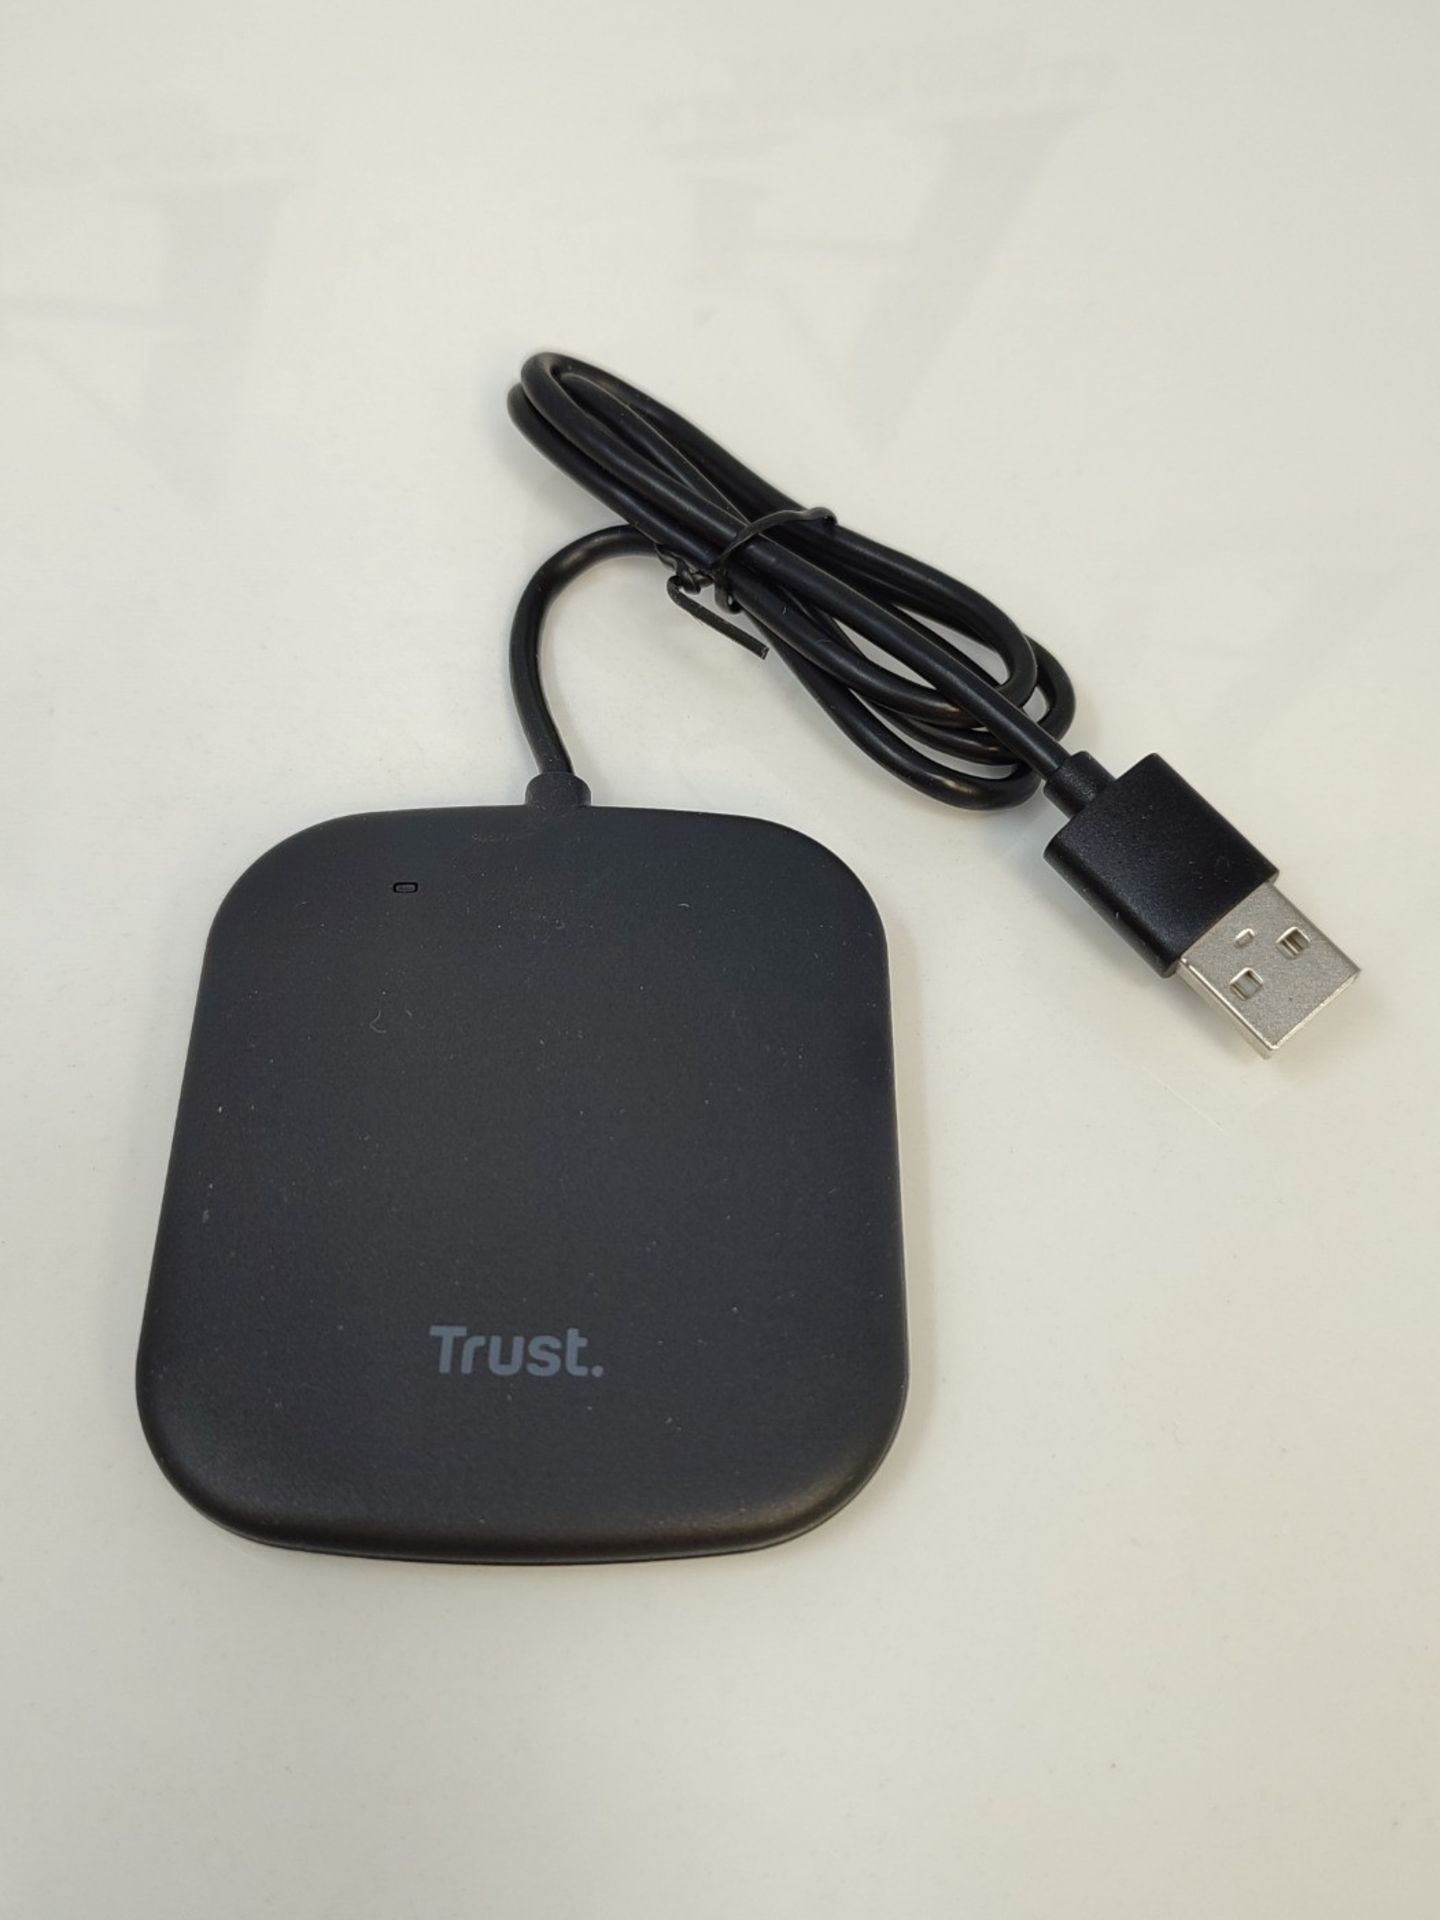 Trust Ceto Contactless Smart Card Reader, CIE 3.0 Electronic Identity Card USB Reader, - Image 3 of 3